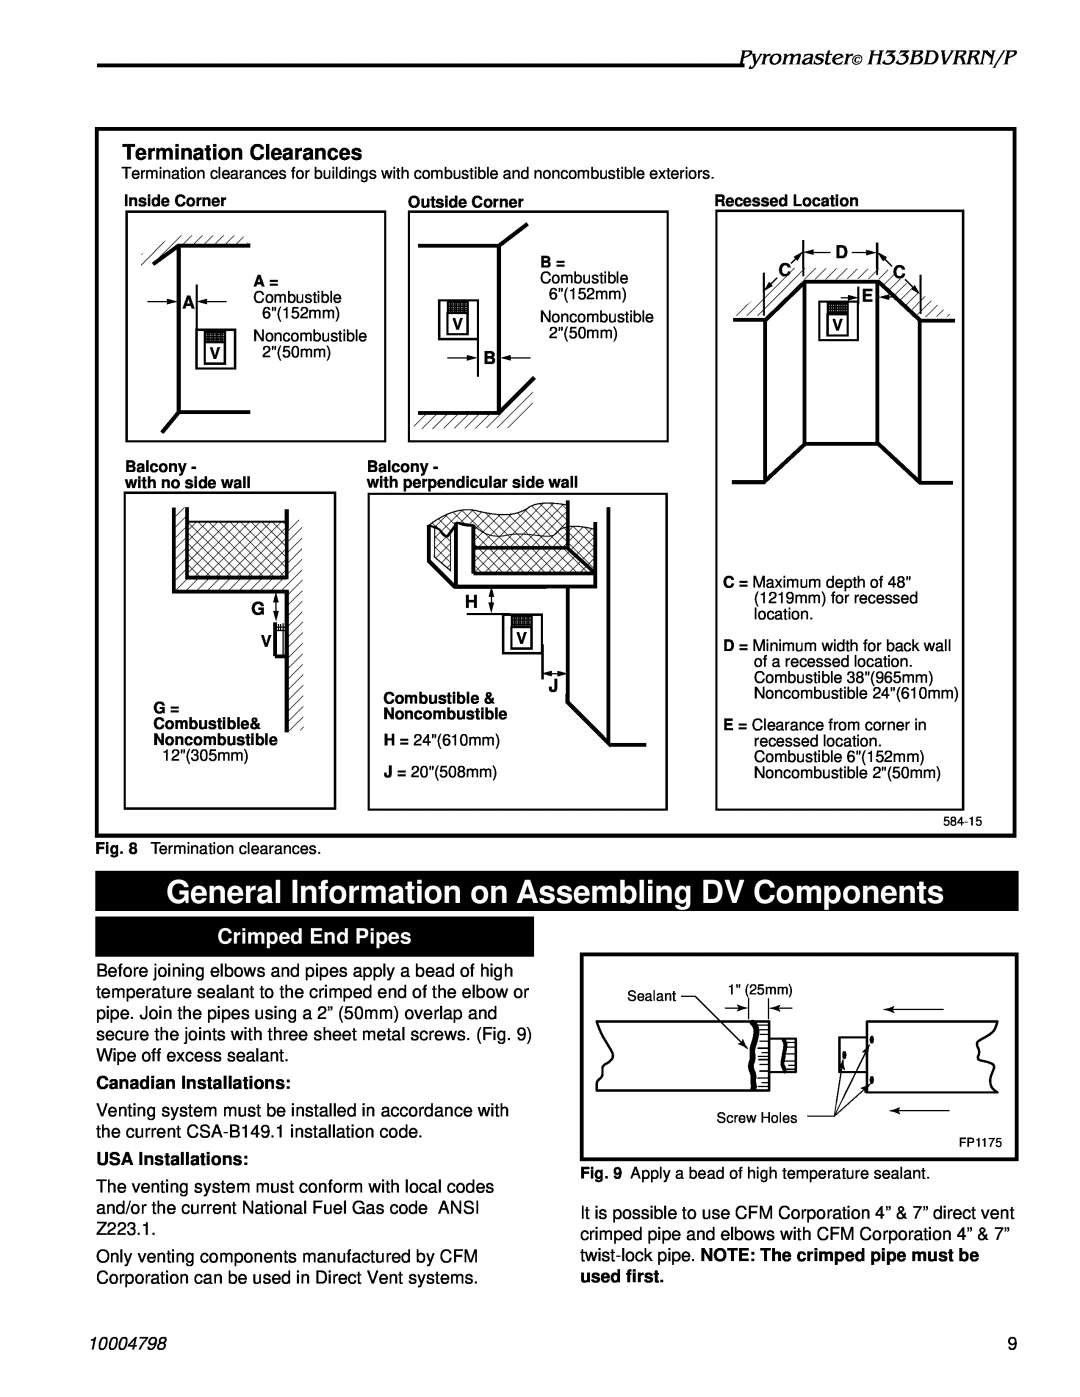 Vermont Casting General Information on Assembling DV Components, Crimped End Pipes, Pyromaster H33BDVRRN/P, D Cc E 